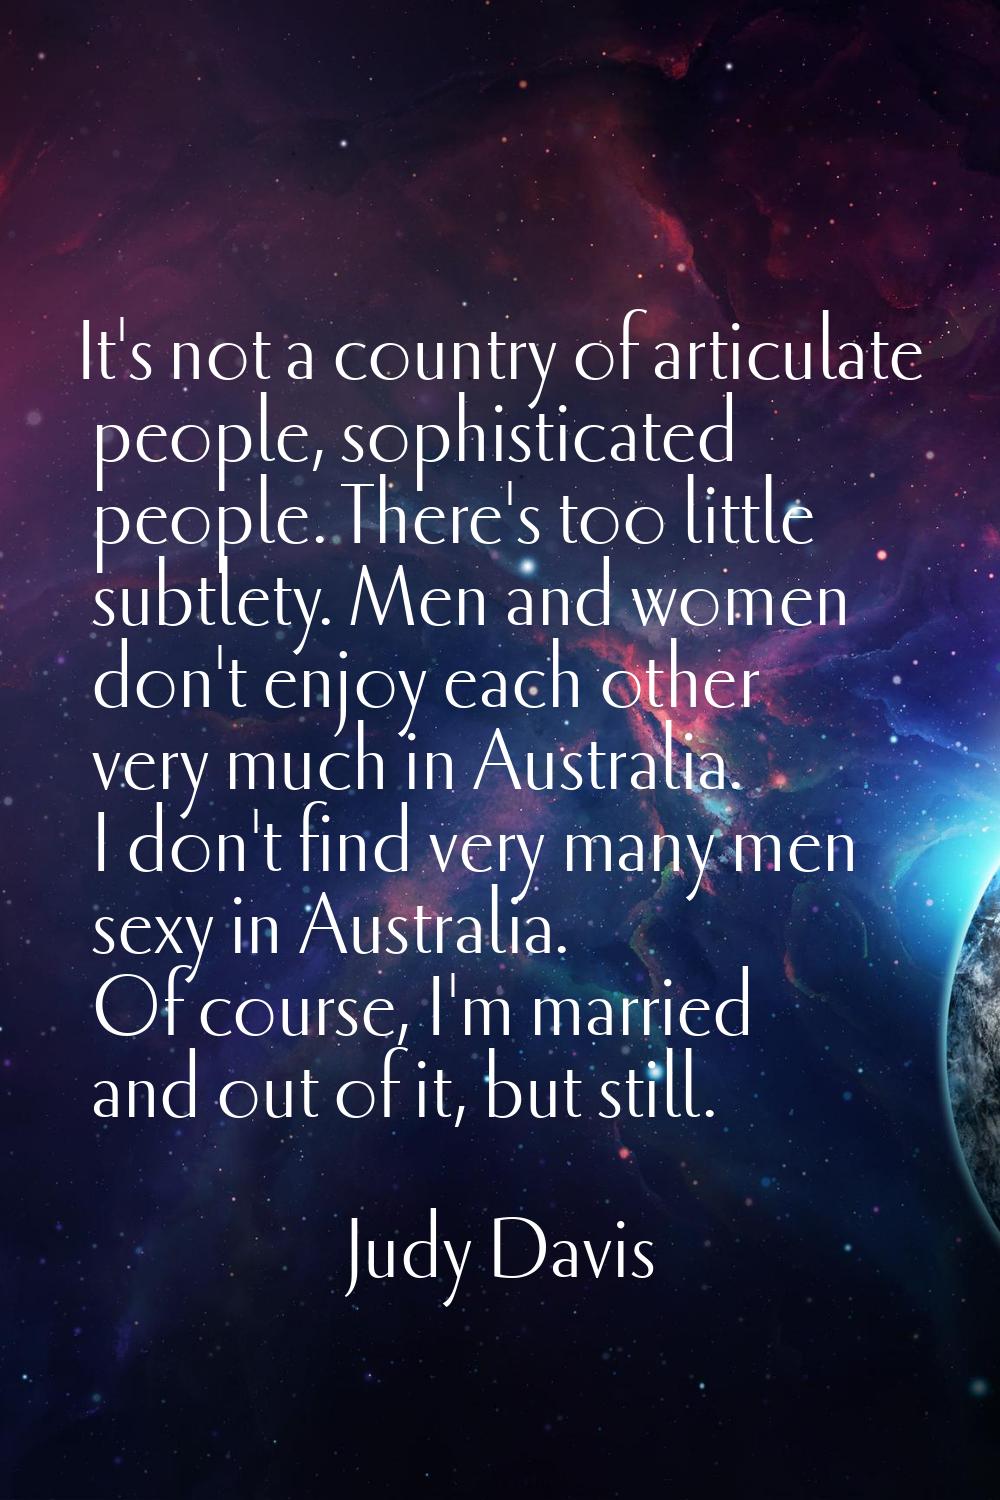 It's not a country of articulate people, sophisticated people. There's too little subtlety. Men and